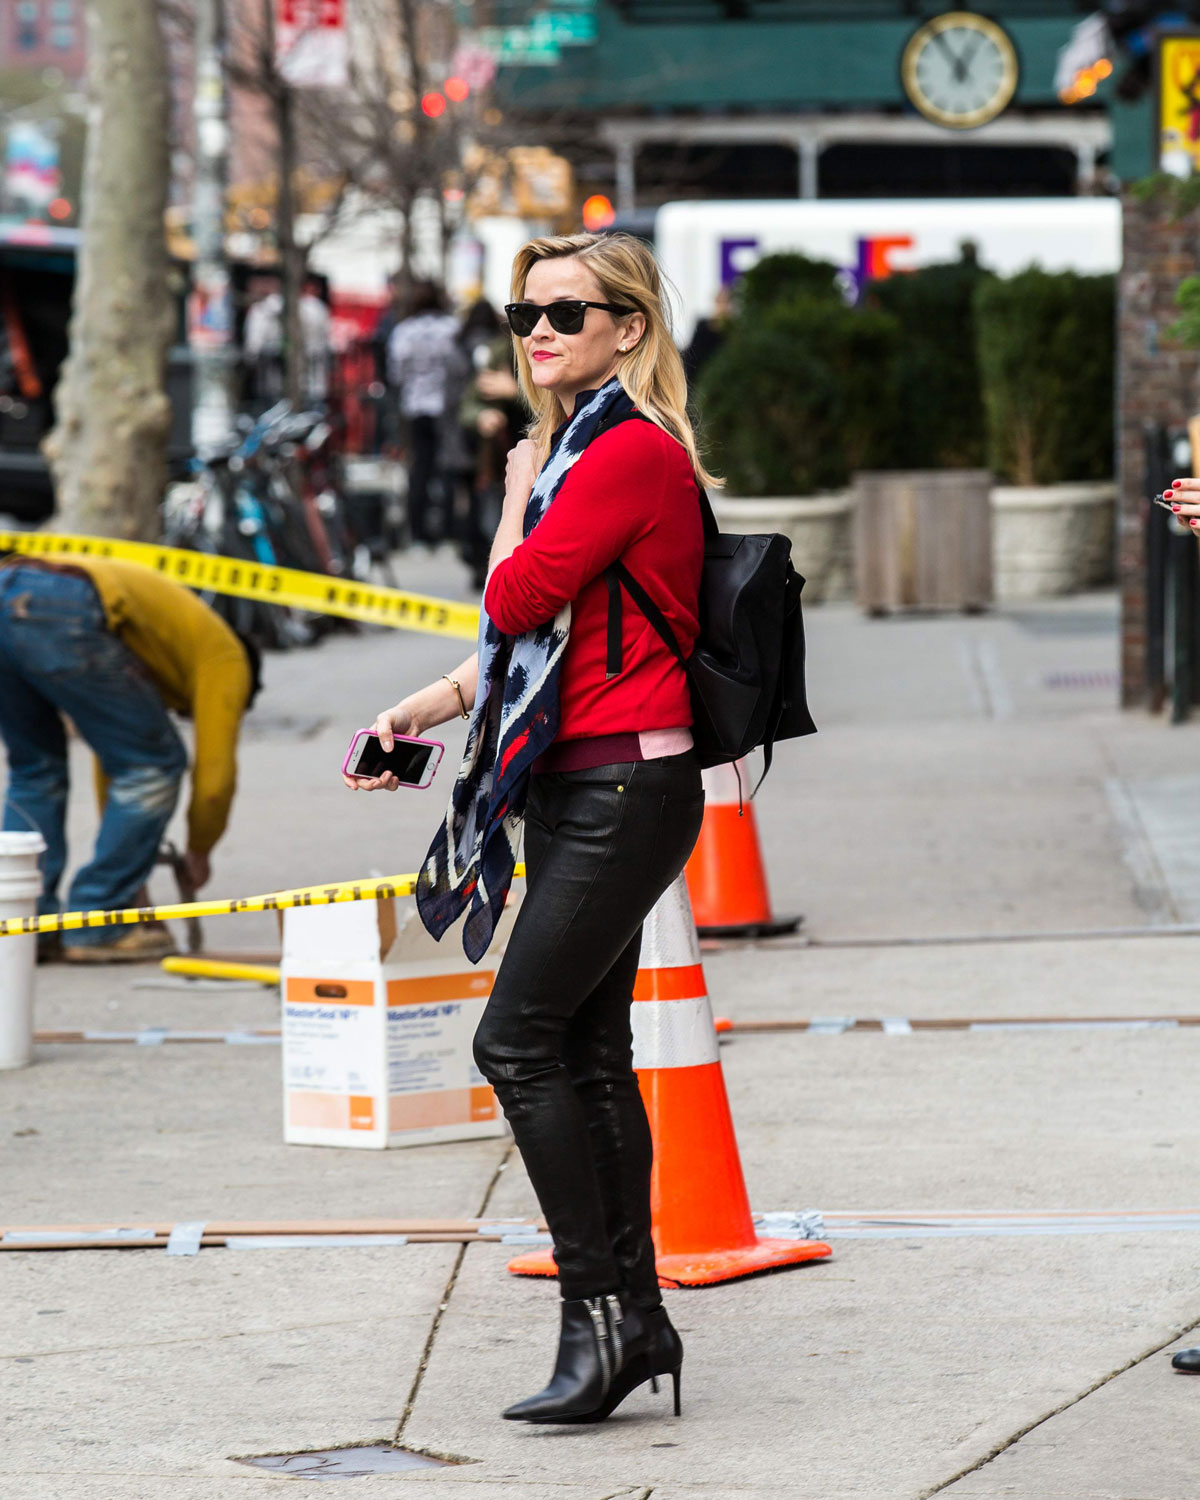 Reese Witherspoon is seen in New York City